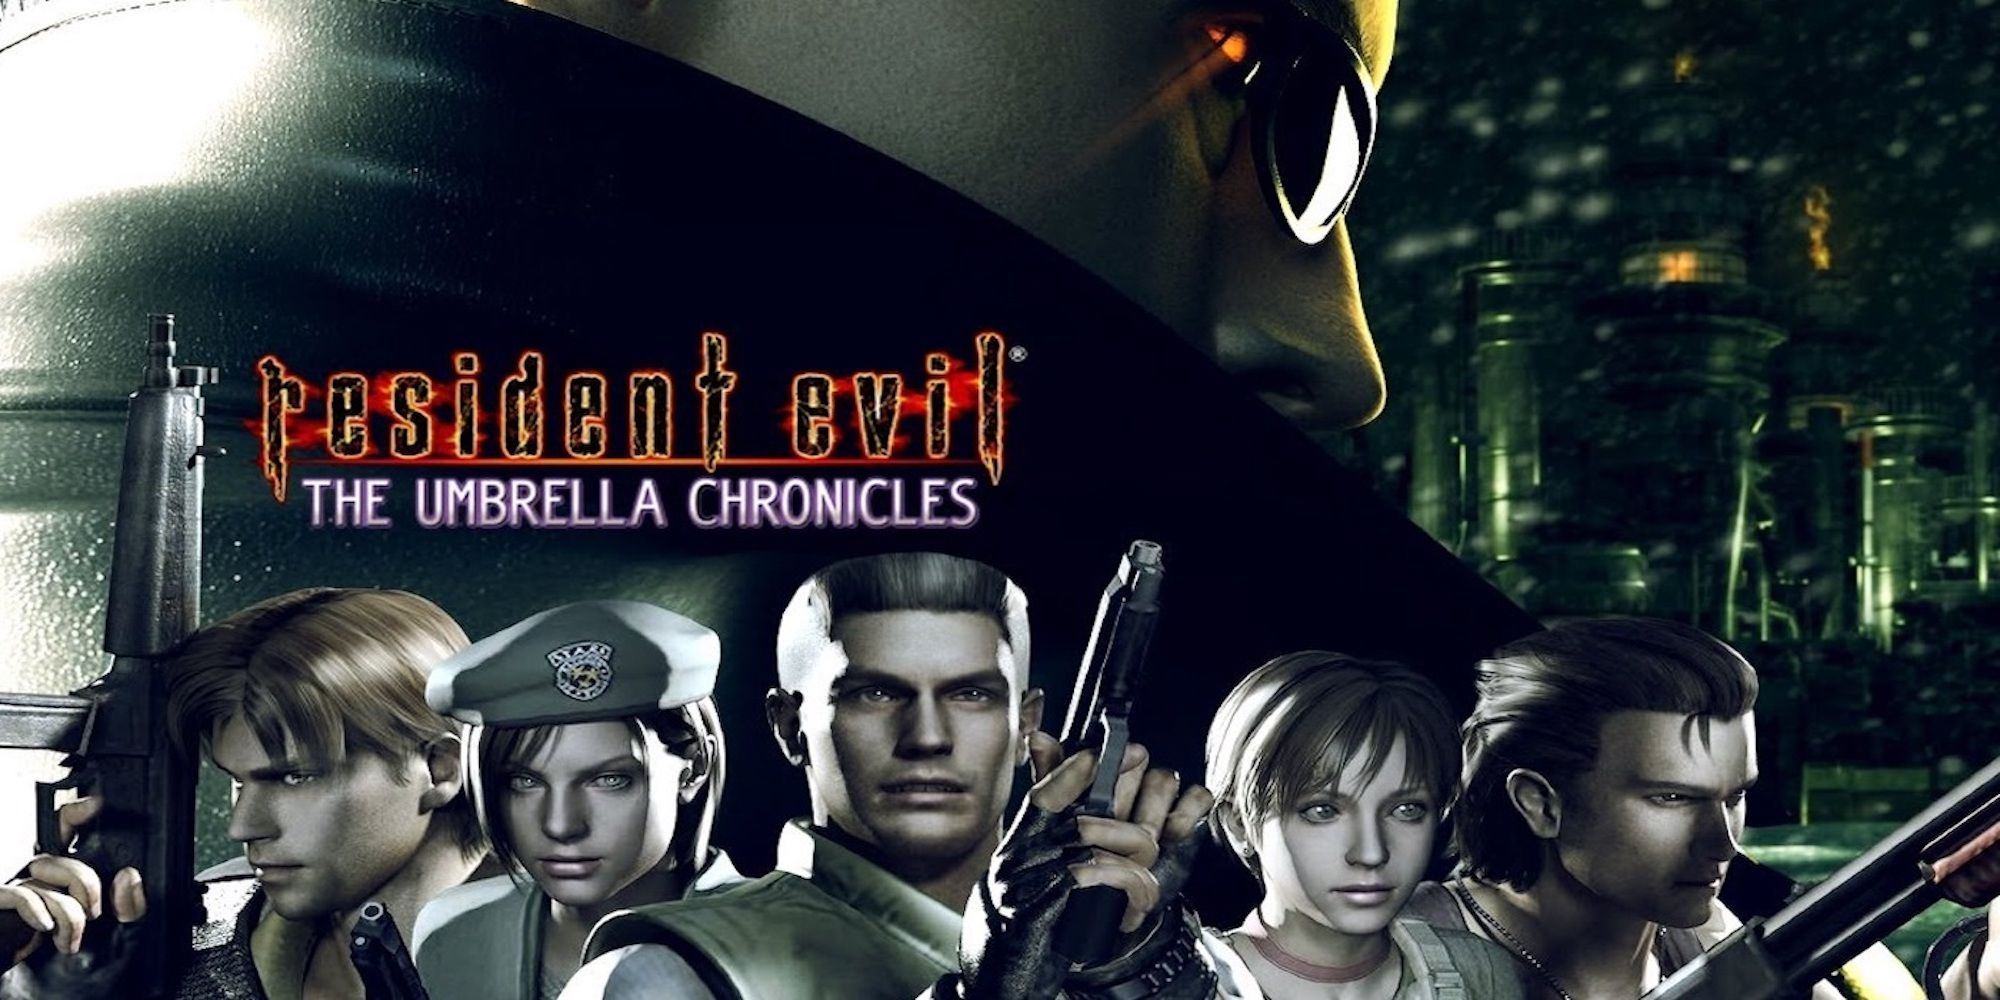 Promo art featuring characters in Resident Evil The Umbrella Chronicles